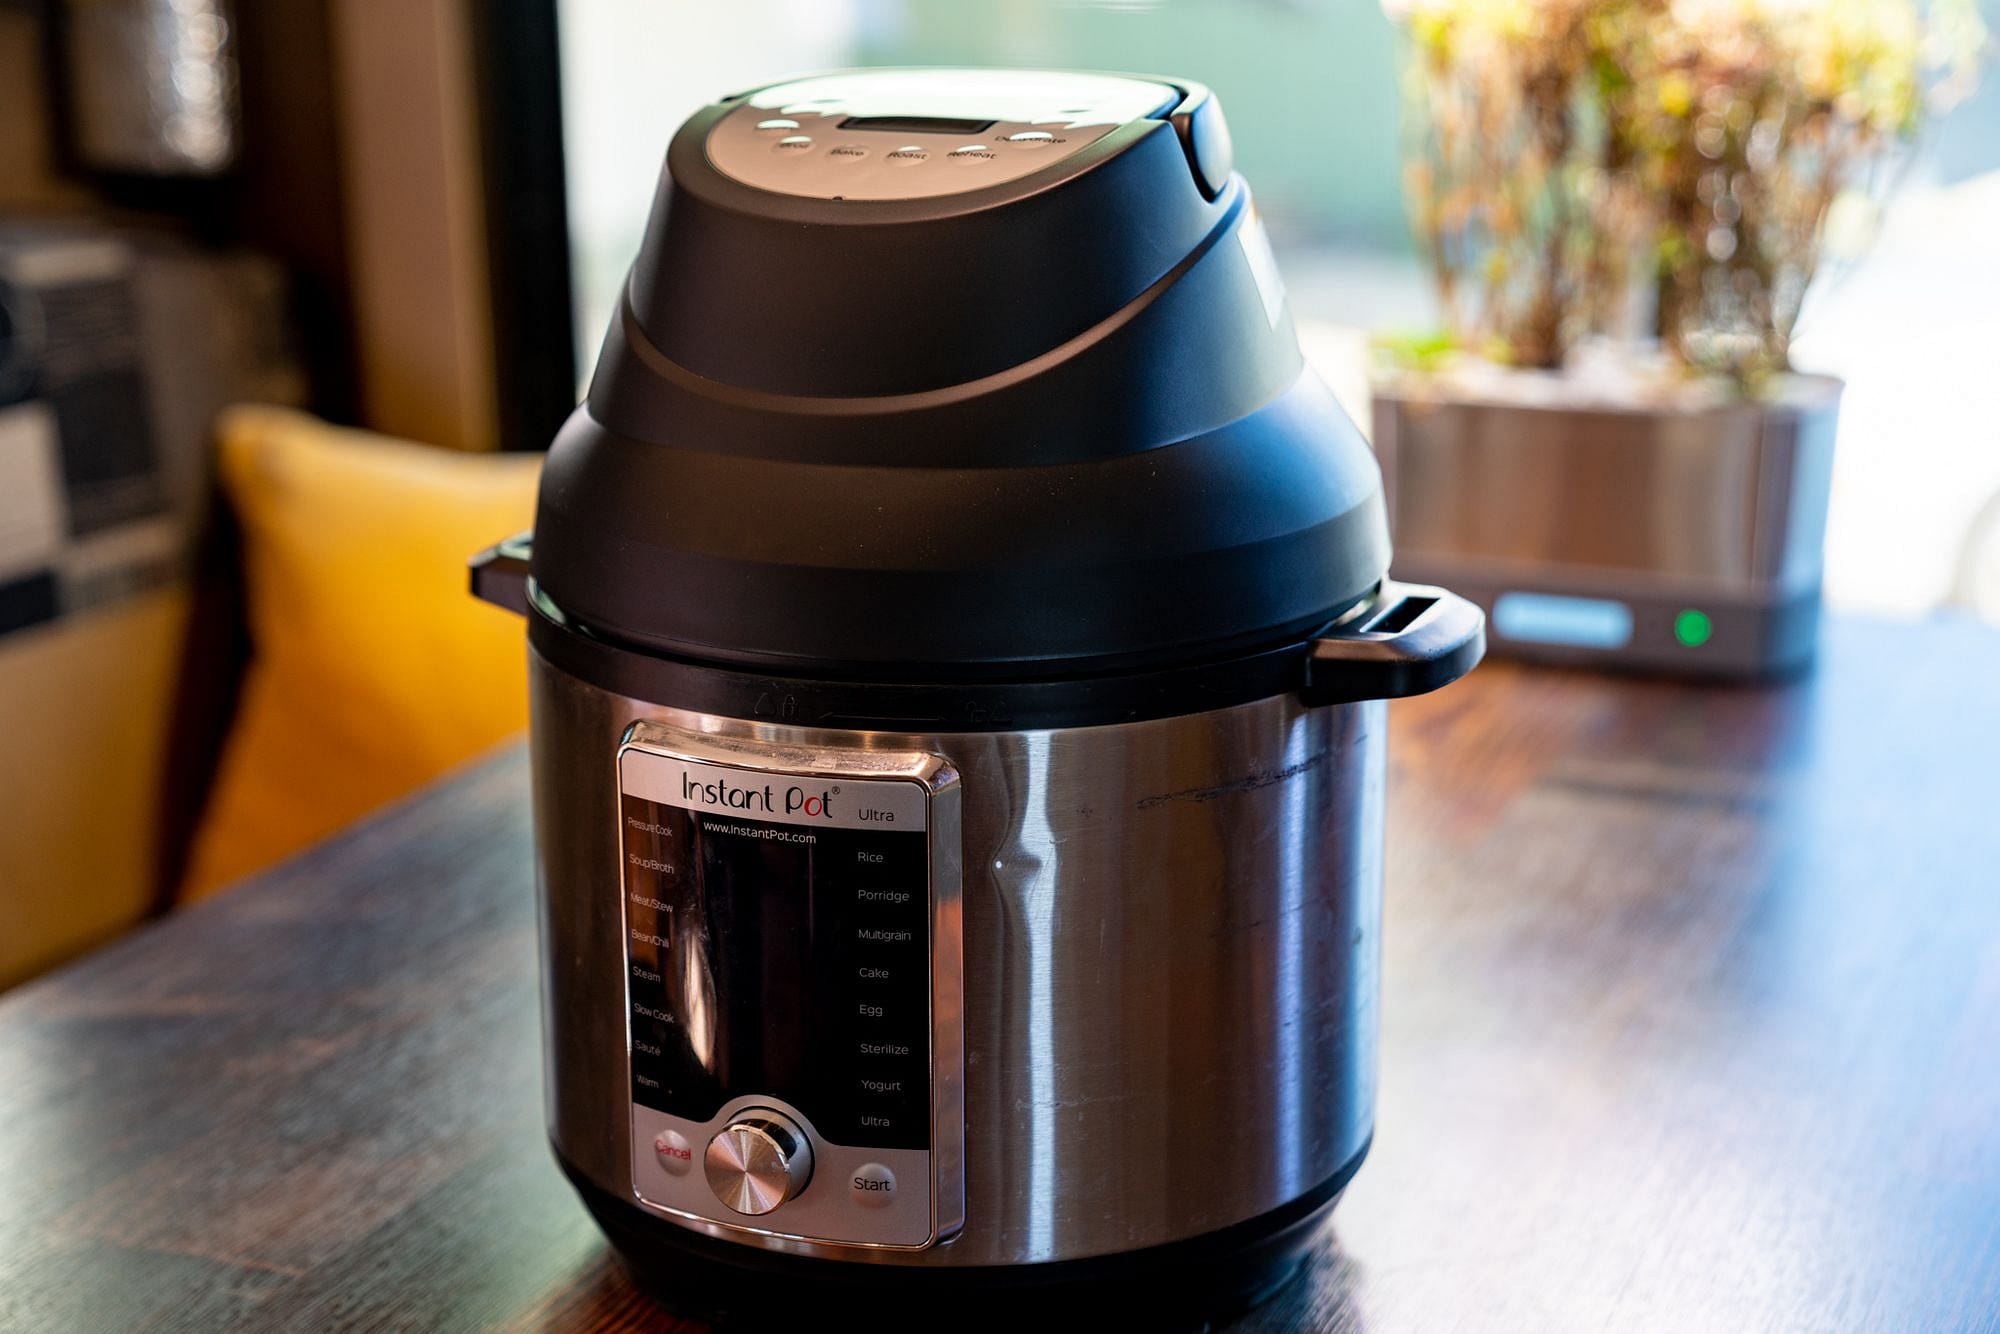 Instant Pot vs air fryer: which should you buy?